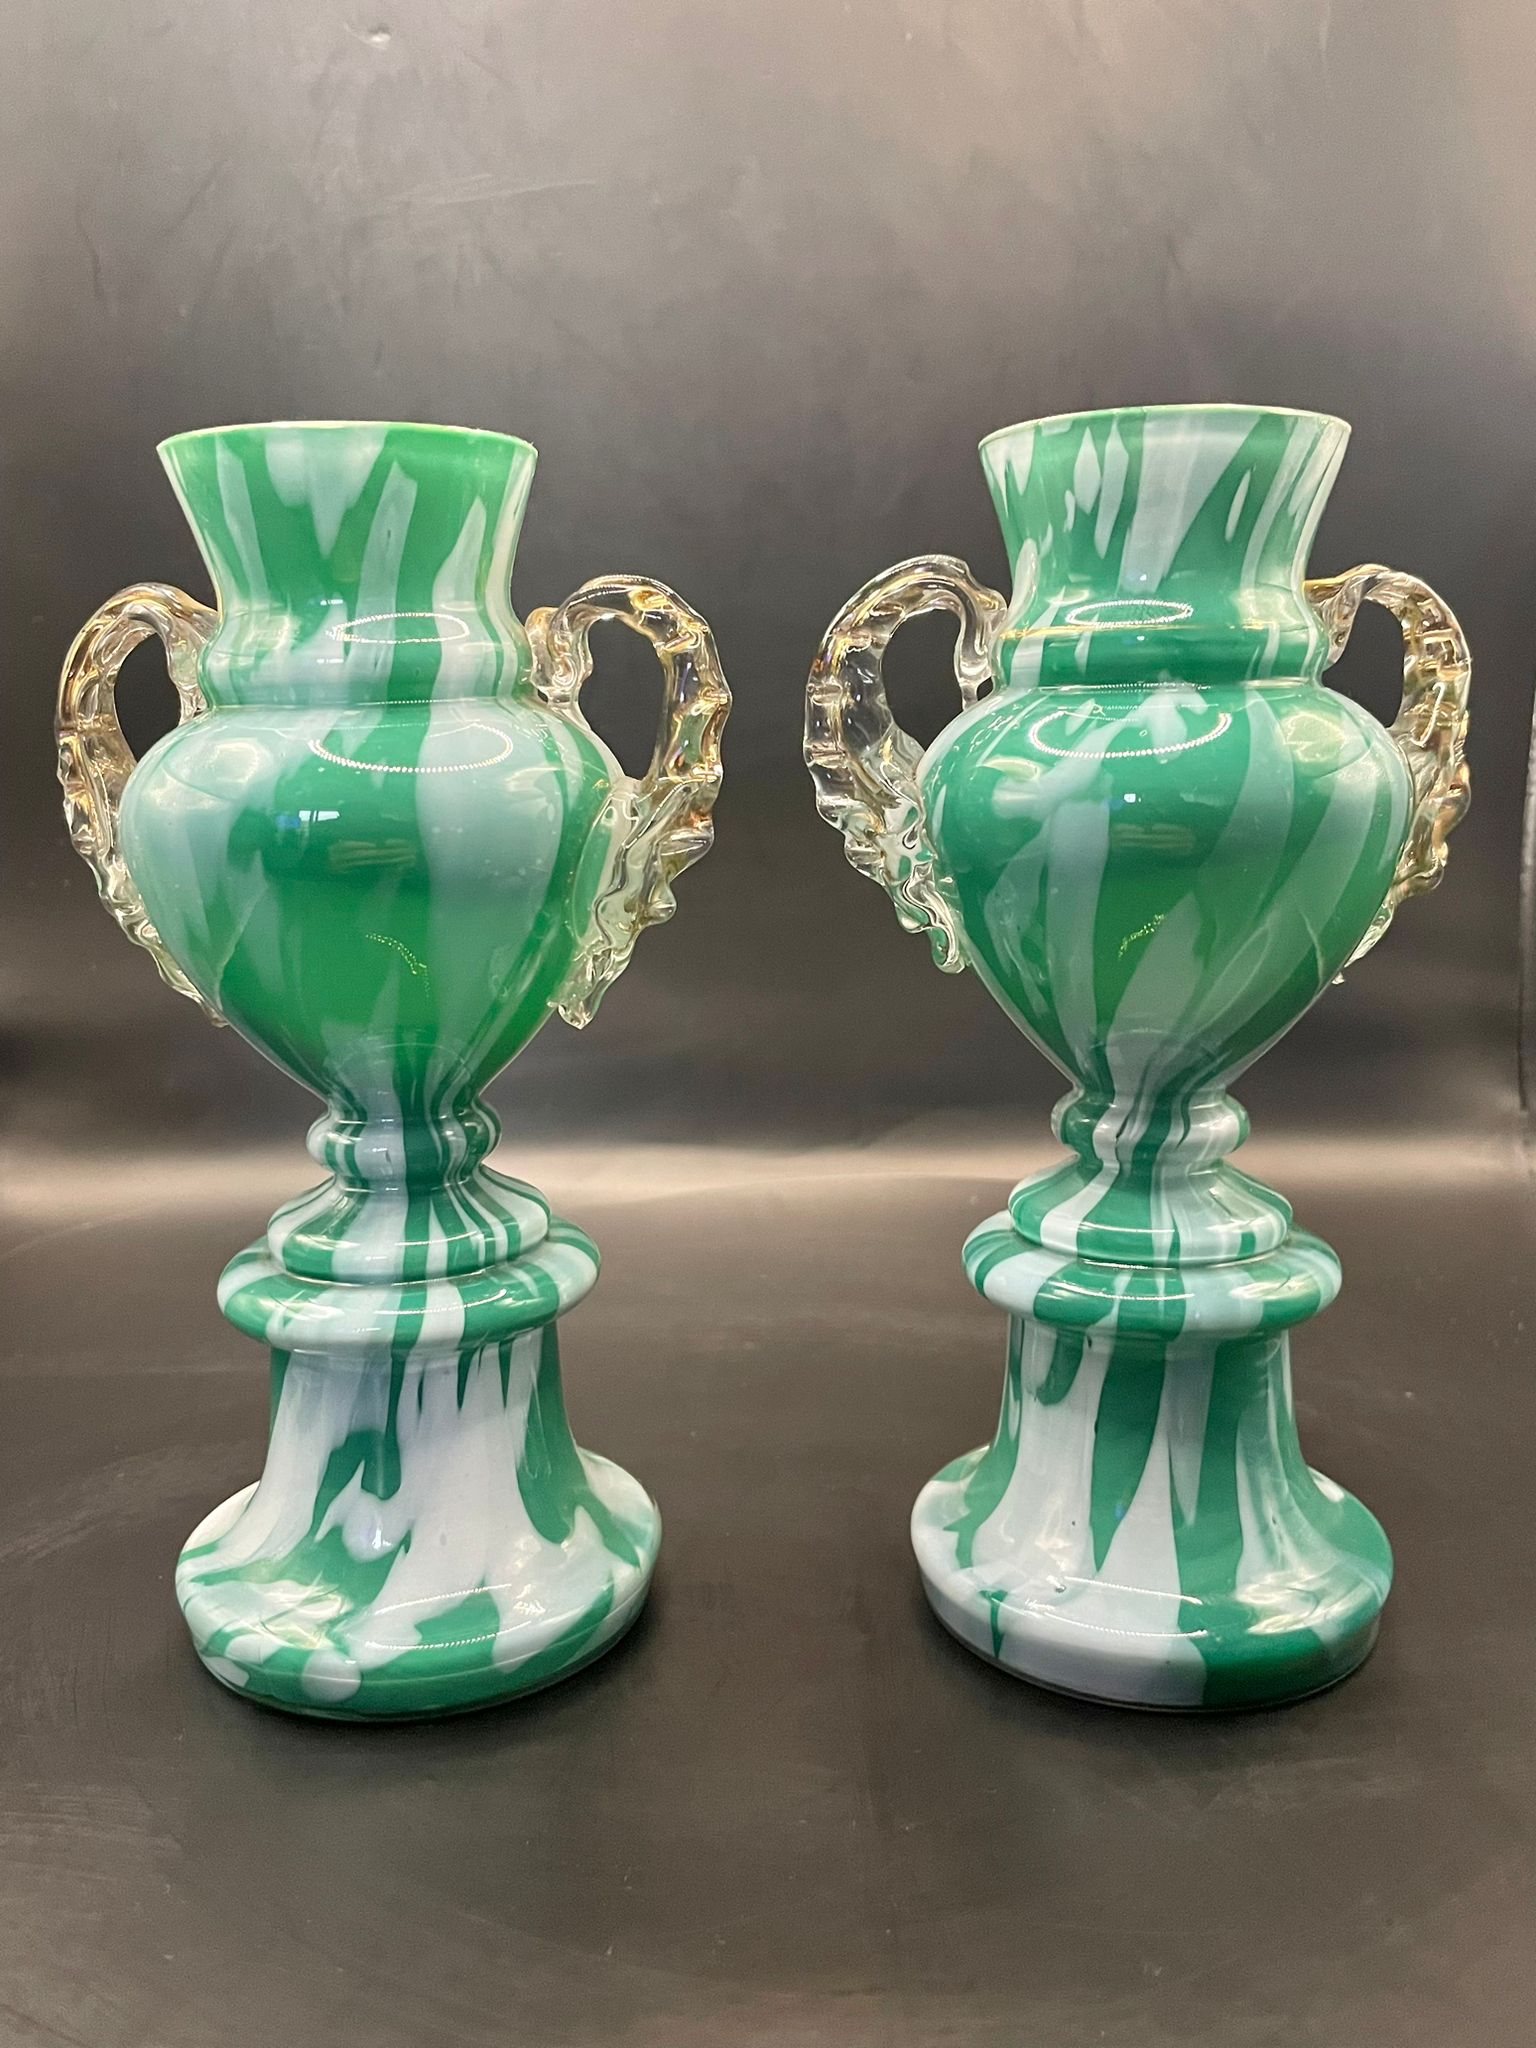 pair of antique Czech/bohemian glass vases which I believe are by franz welz,